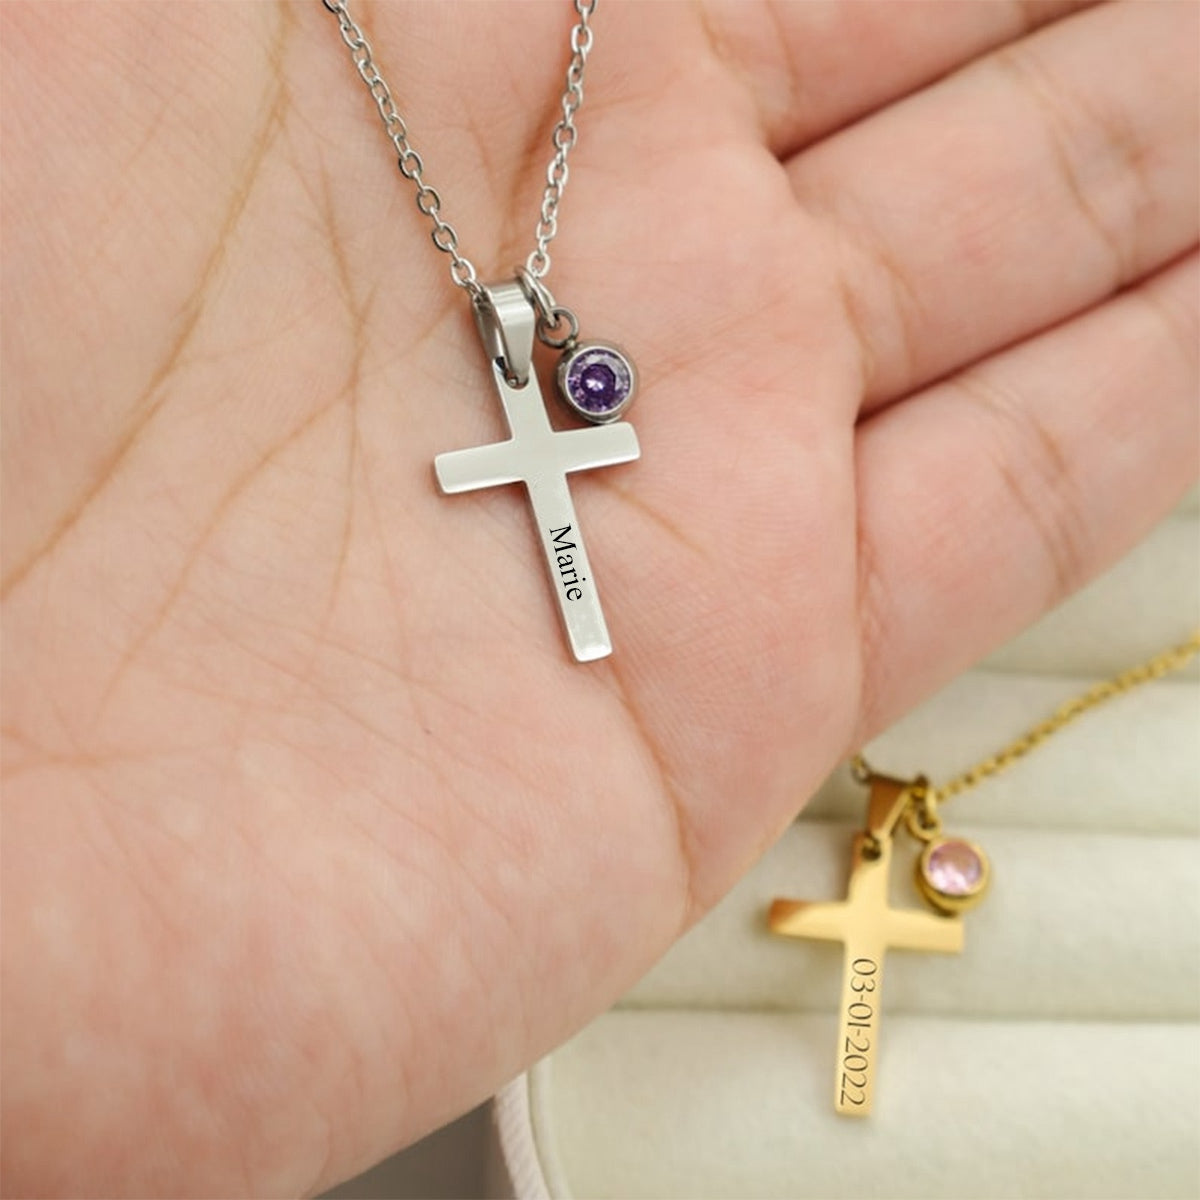 Personalized cross necklace with birthstone, confirmation gift for her